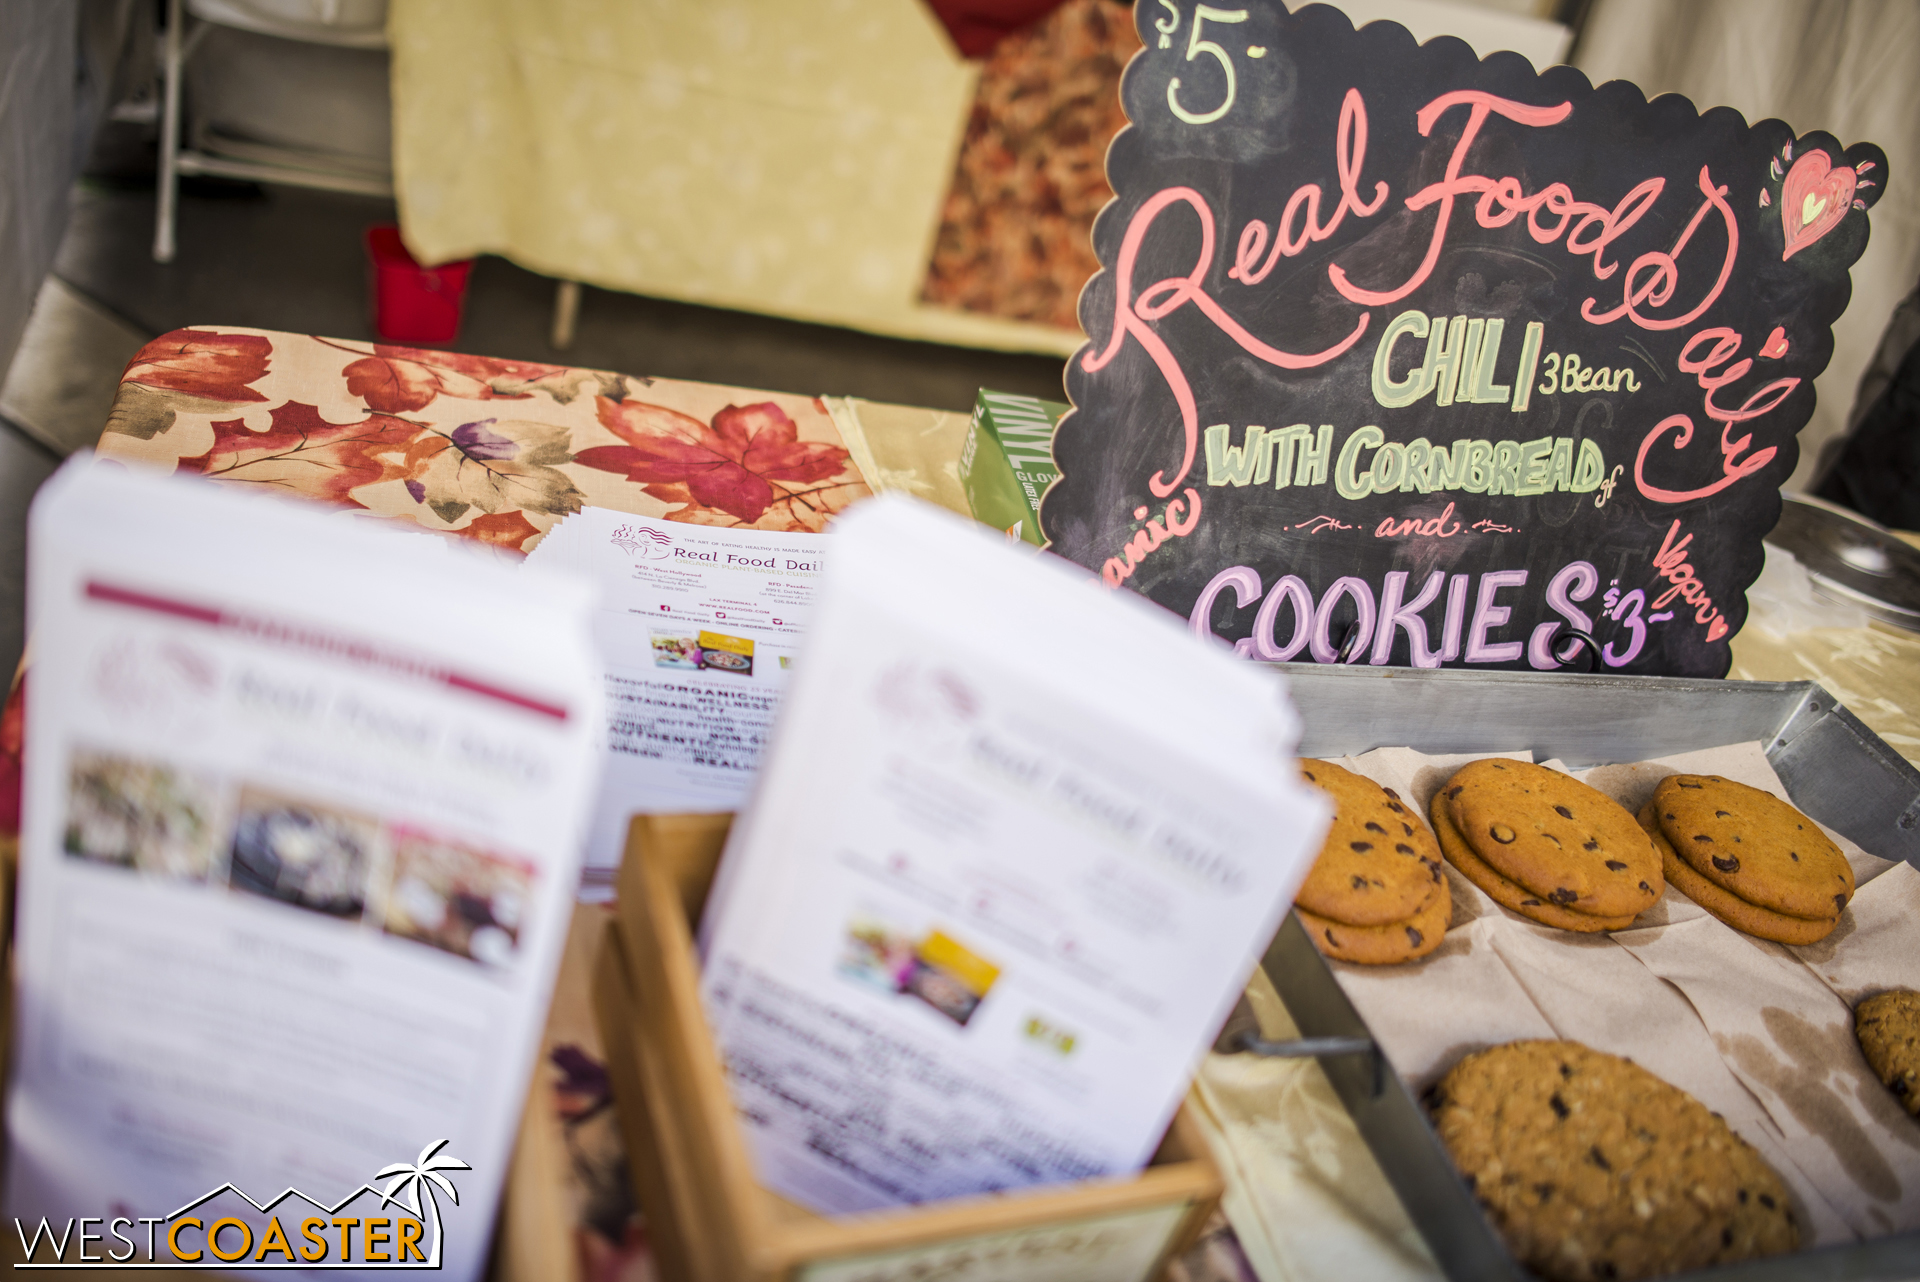  Local vendor Real Food Daily offered cookies and chili. 